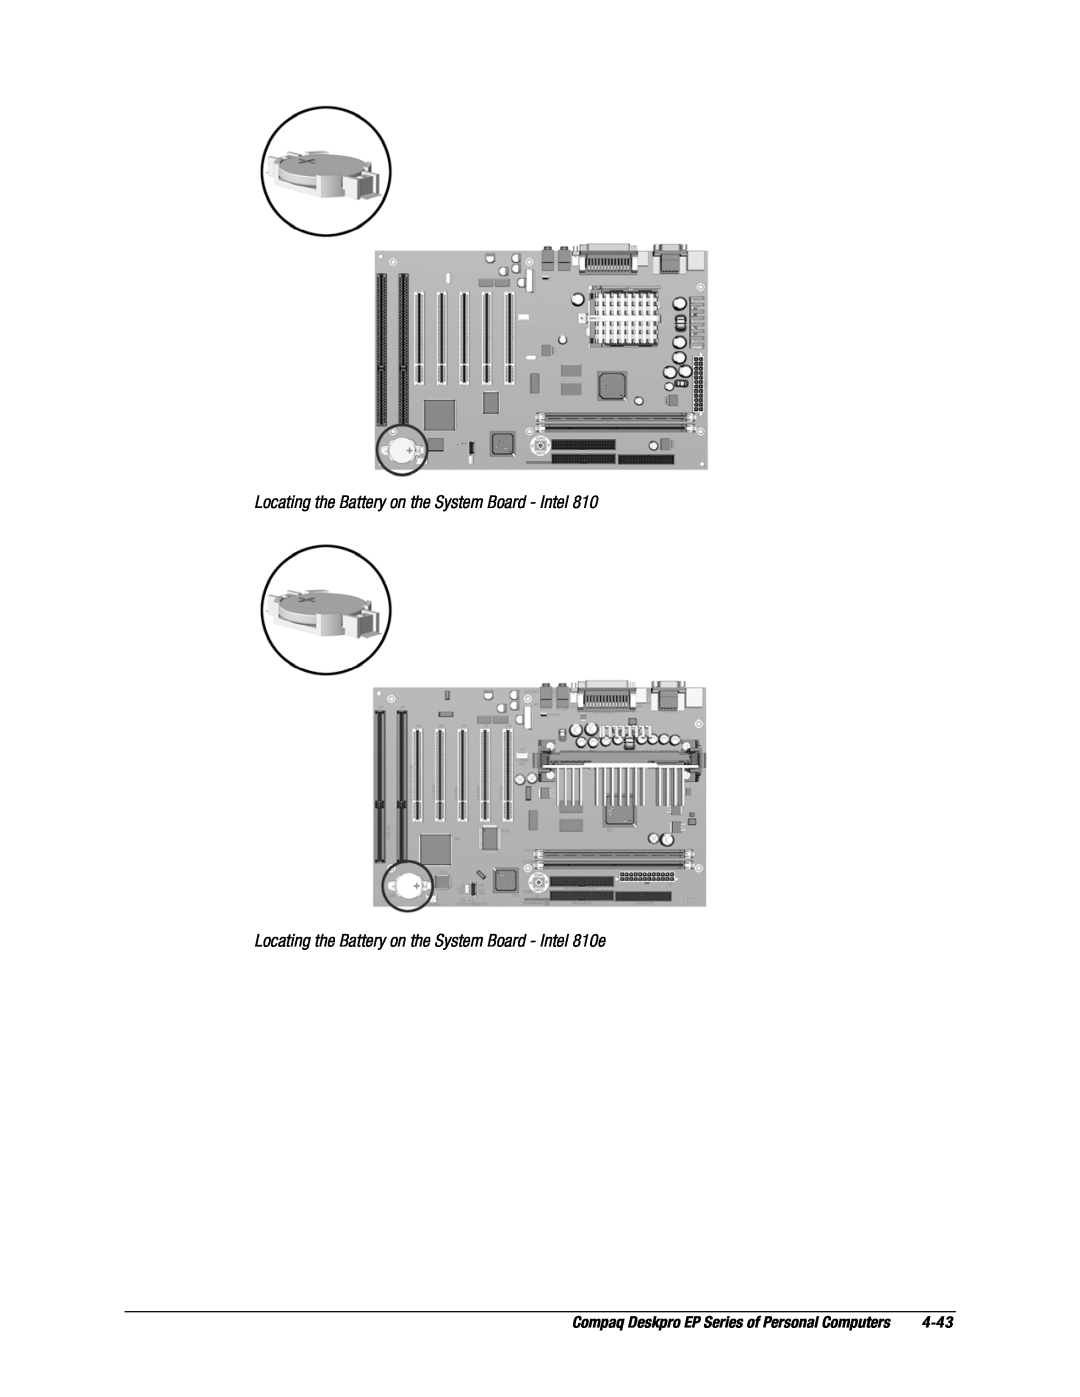 Compaq EP Series manual Locating the Battery on the System Board - Intel 810e, 4-43 